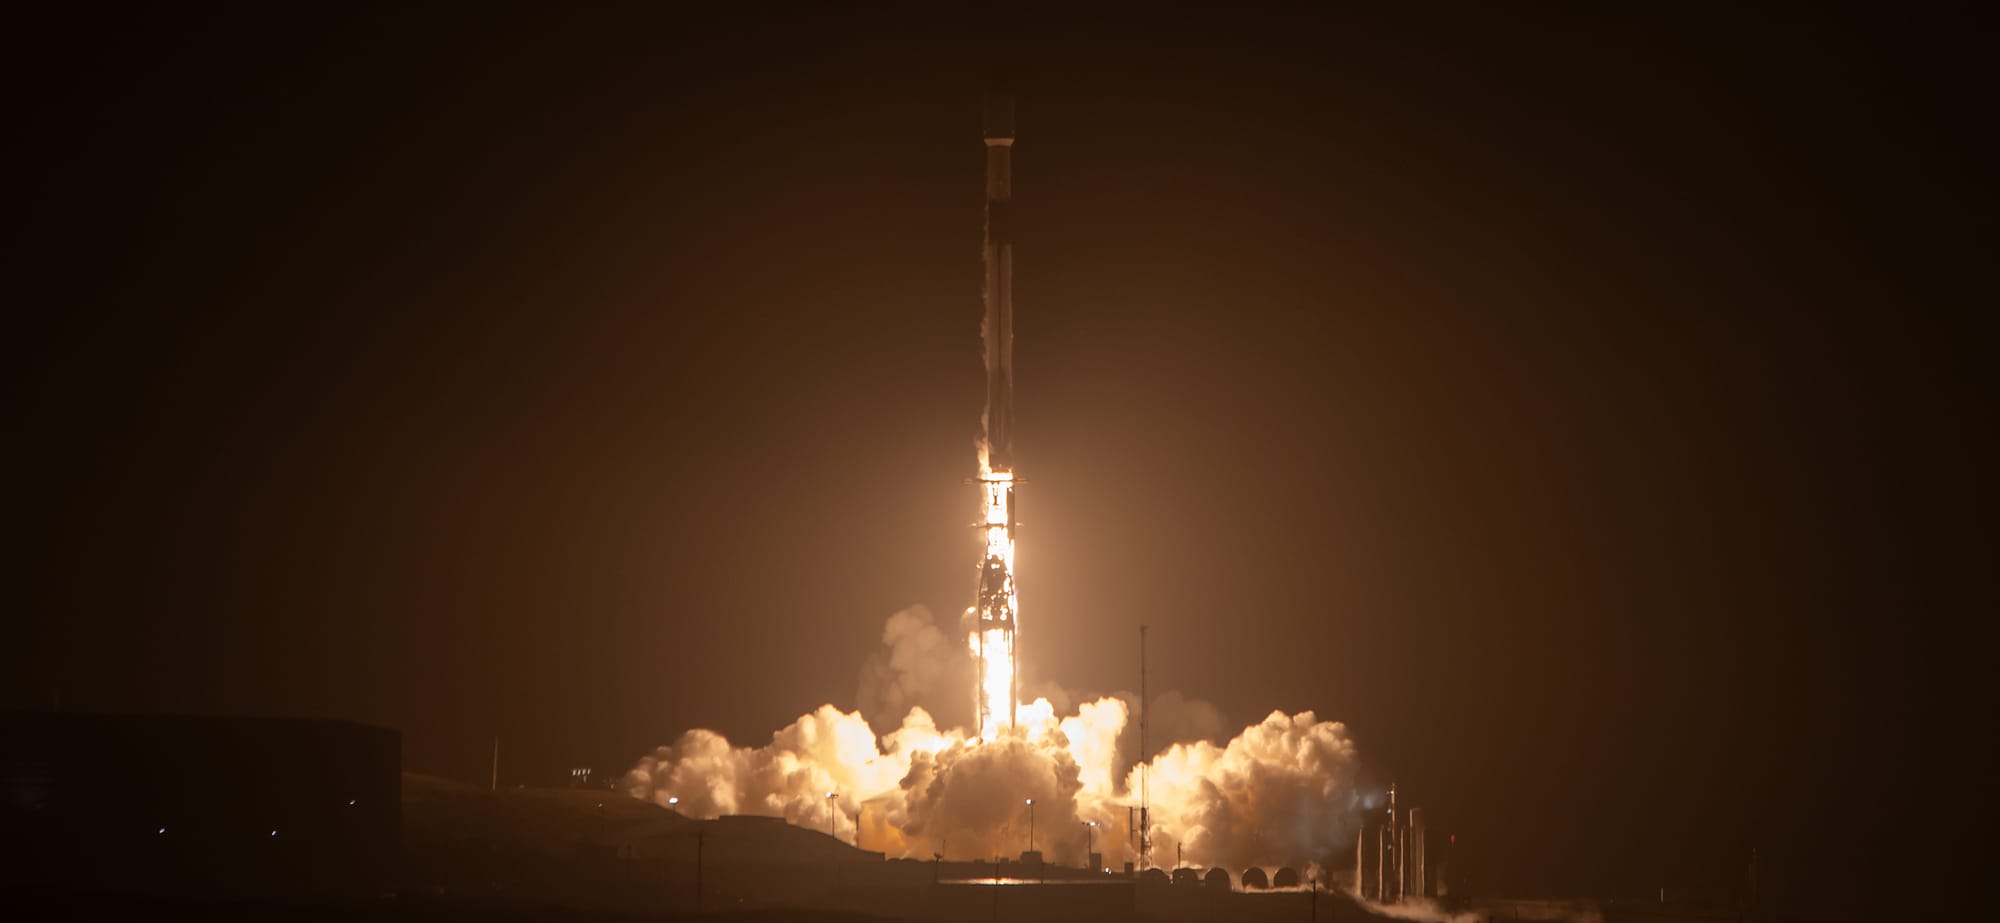 Falcon 9 lifting off from SLC-4E. ©SpaceX